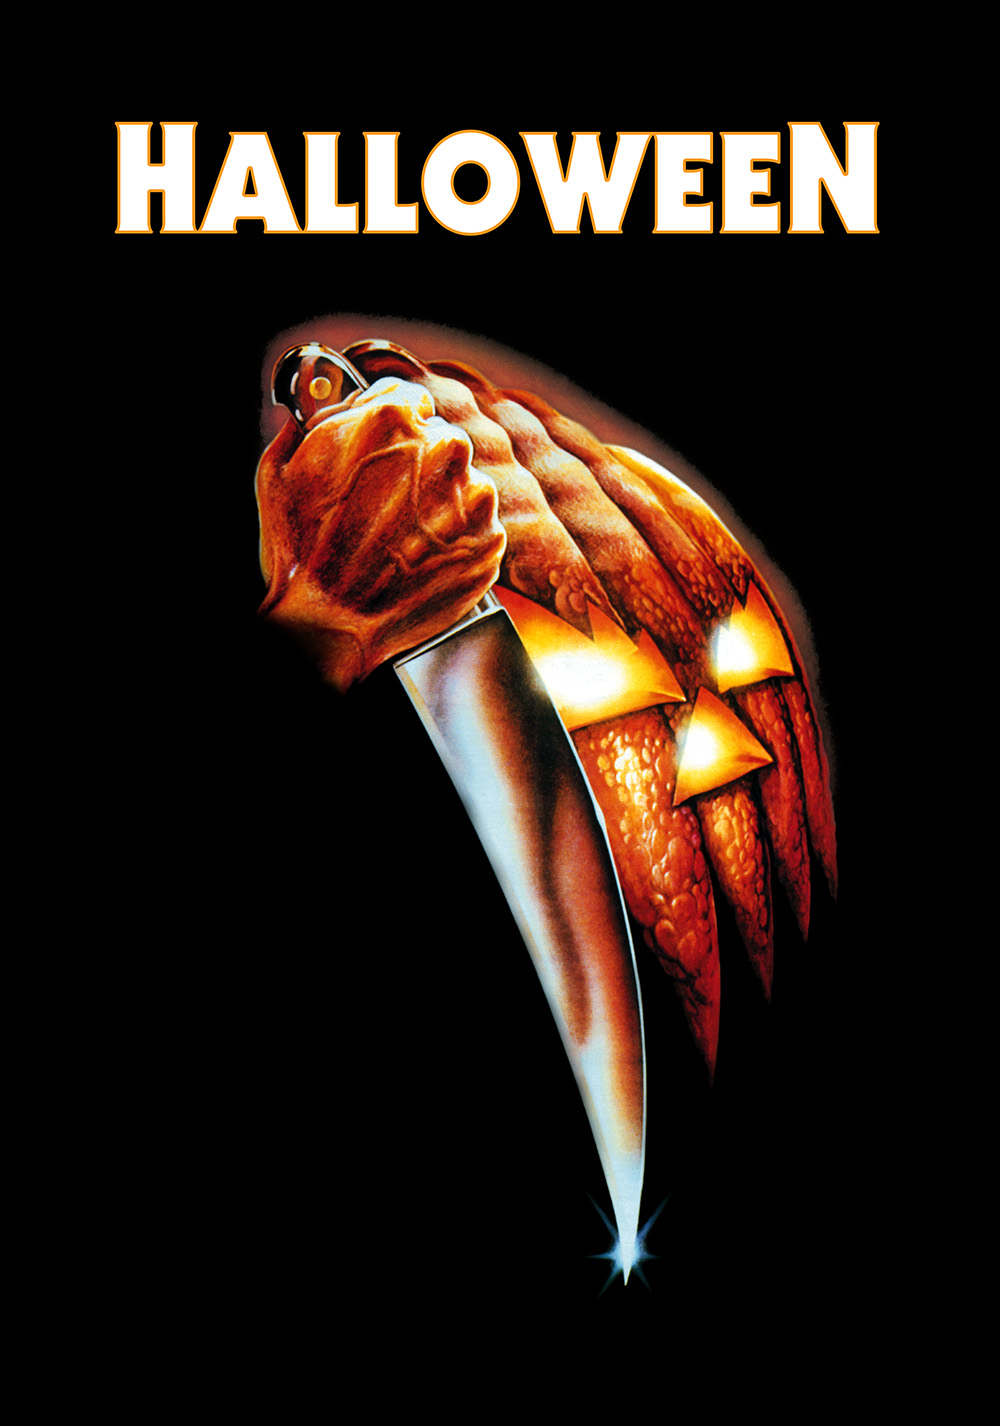 Halloween (1978) Picture - Image Abyss